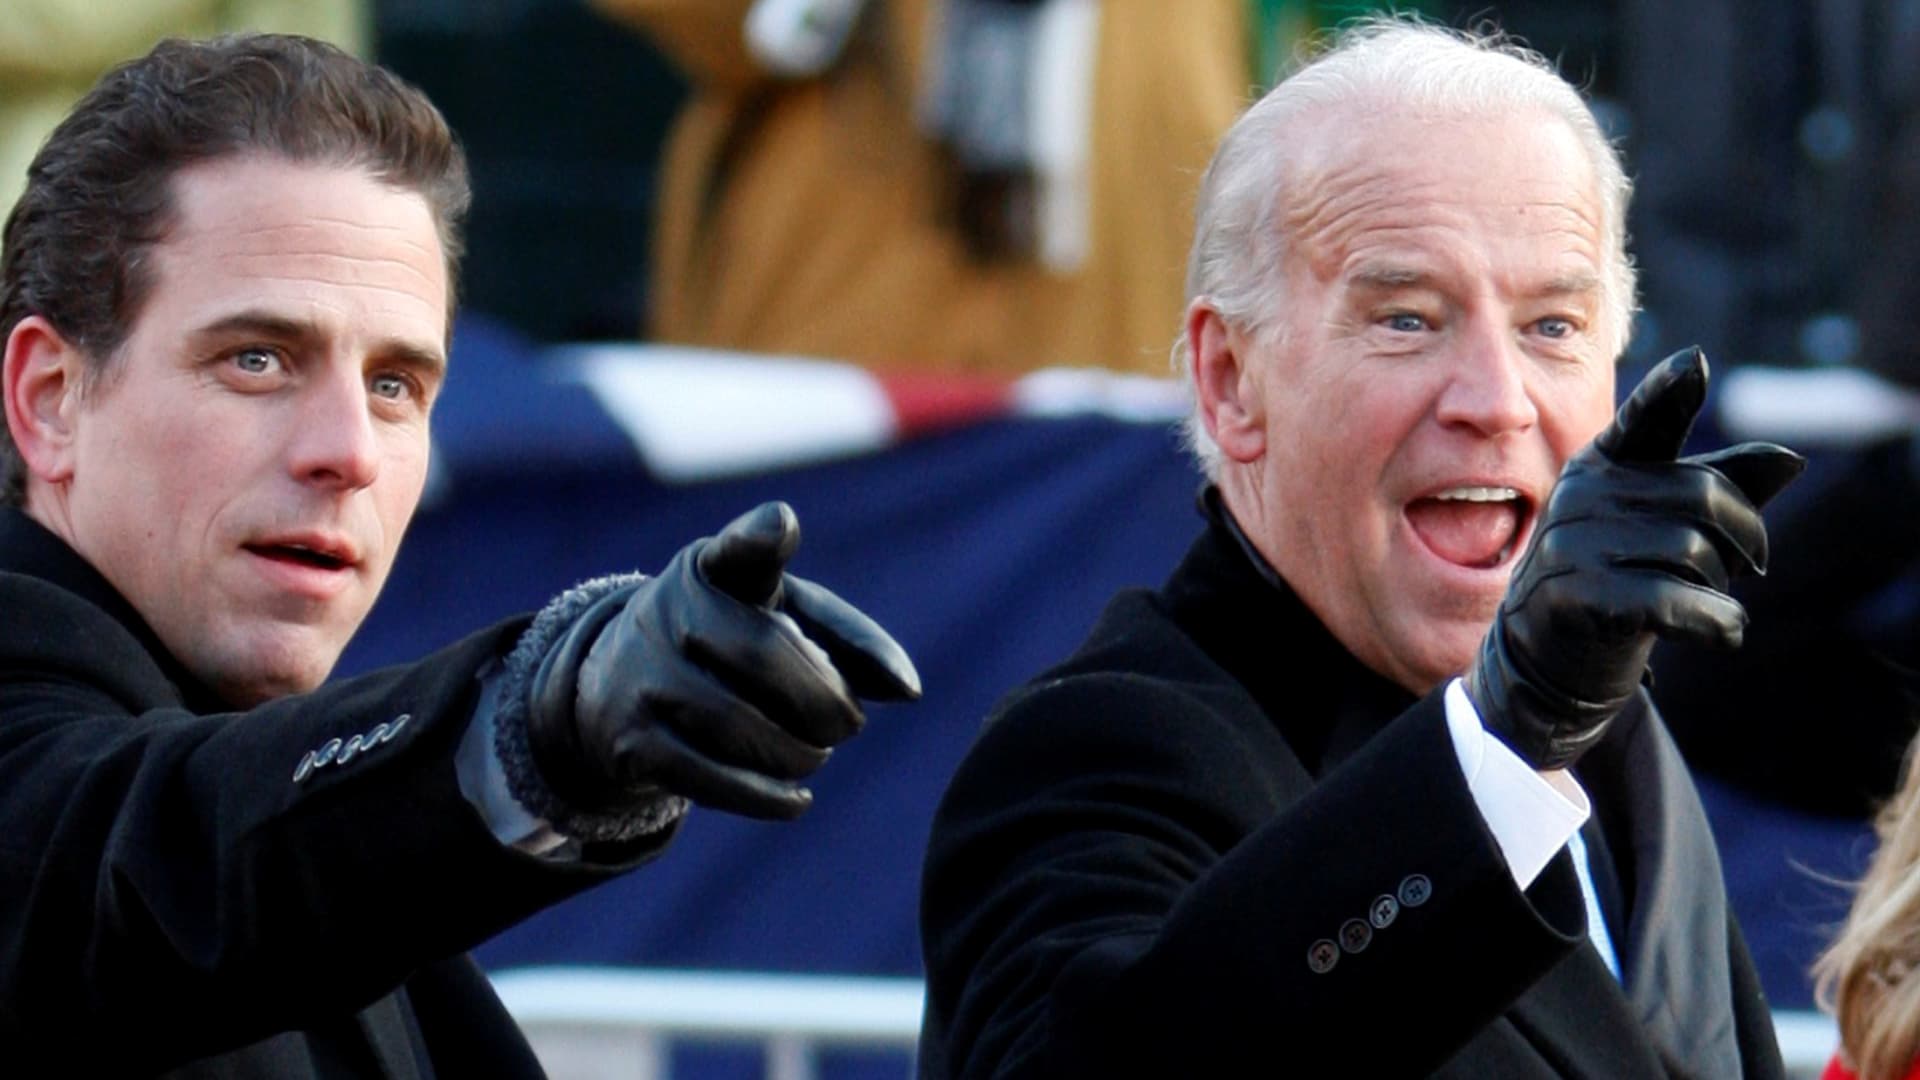 U.S. Vice President Joe Biden (R) points to some faces in the crowd with his son Hunter as they walk down Pennsylvania Avenue following the inauguration ceremony of President Barack Obama in Washington, January 20, 2009.